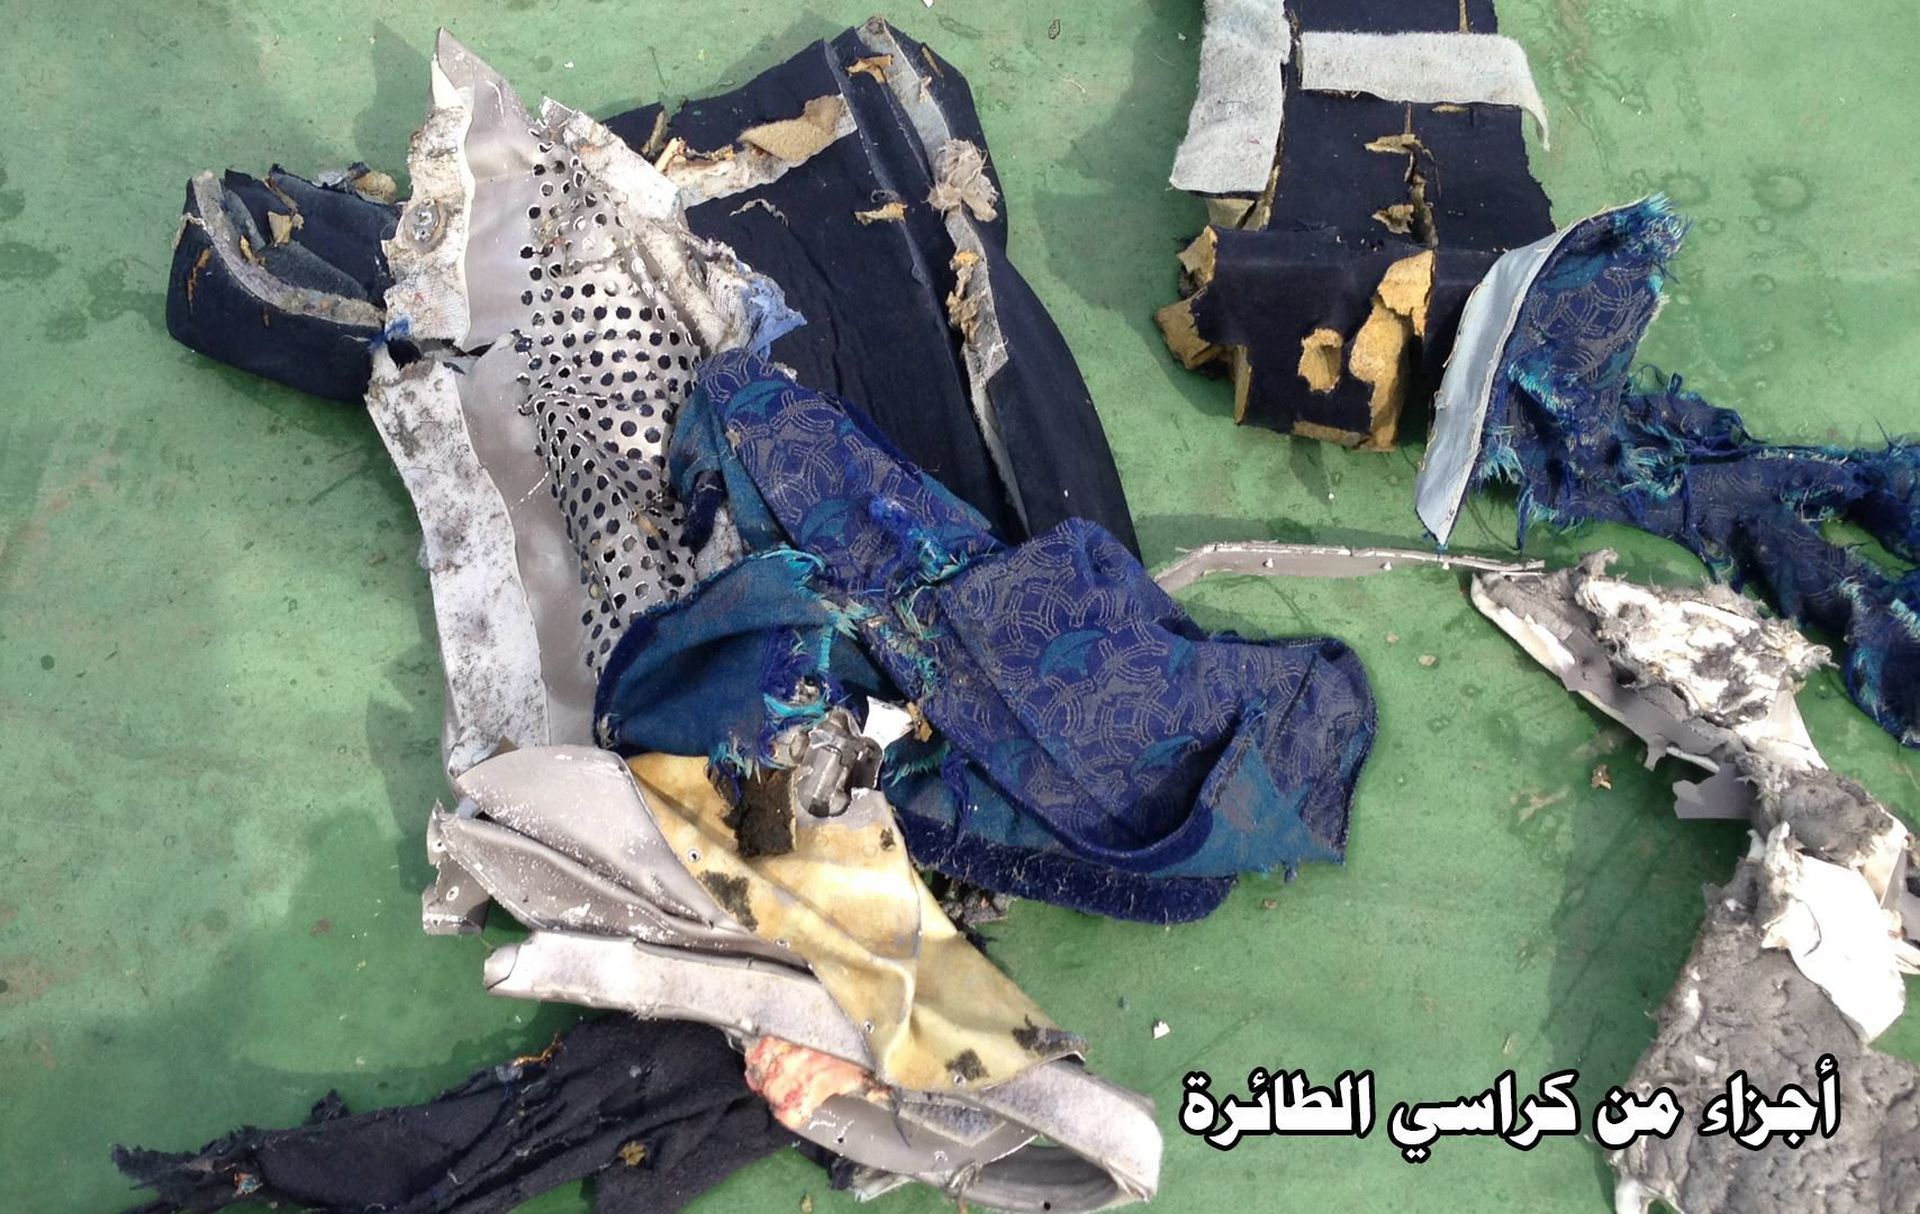 epa05320974 A handout picture made available by the Egyptian Defence Ministry showing pieces of a chair from the EgyptAir MS804 flight missing at sea, unspecified location in Egypt, 21 May 2016. The Armed Forces of Egypt announced that the debris of an EgyptAir Airbus A320, which had disappeared early on 19 May 2016, as well as personal belongings of the passengers are floating in the Mediterranean Sea, north of the Egyptian city of Alexandria. The EgyptAir passenger jet had left Paris bound for Cairo with 66 people on board, but crashed into the Mediterranean Sea for unknown reasons.  EPA/EGYPTIAN DEFENCE MINISTRY / HANDOUT  HANDOUT EDITORIAL USE ONLY/NO SALES